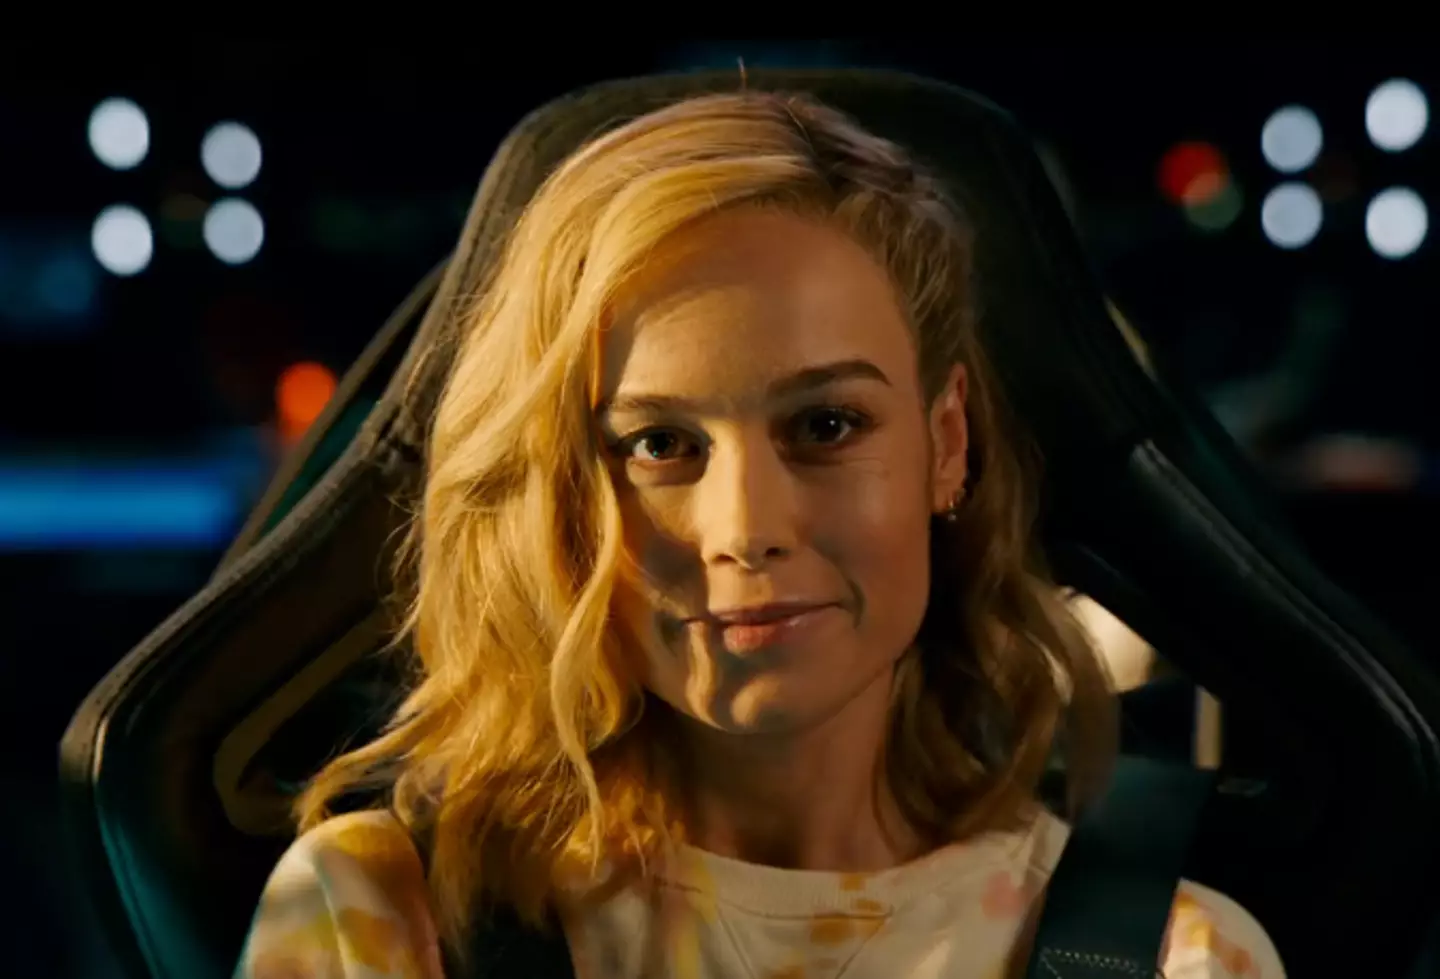 Larson made her first Captain Marvel appearance in 2019.